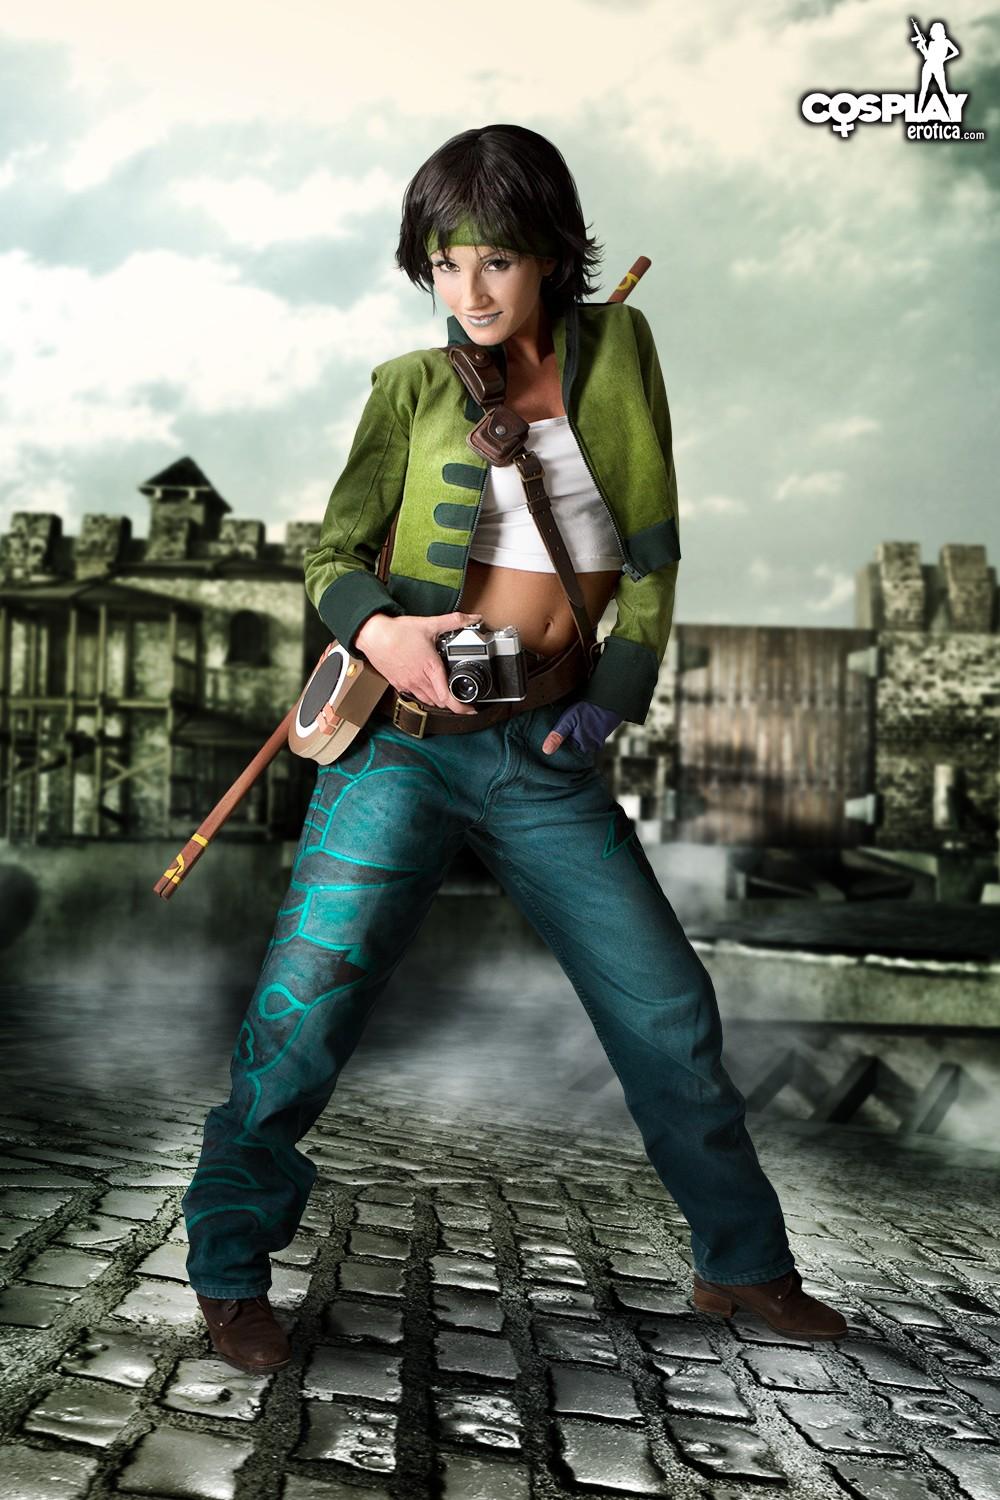 Cosplay hottie Zorah dresses up as Jade from Beyond Good and Evil #60210536